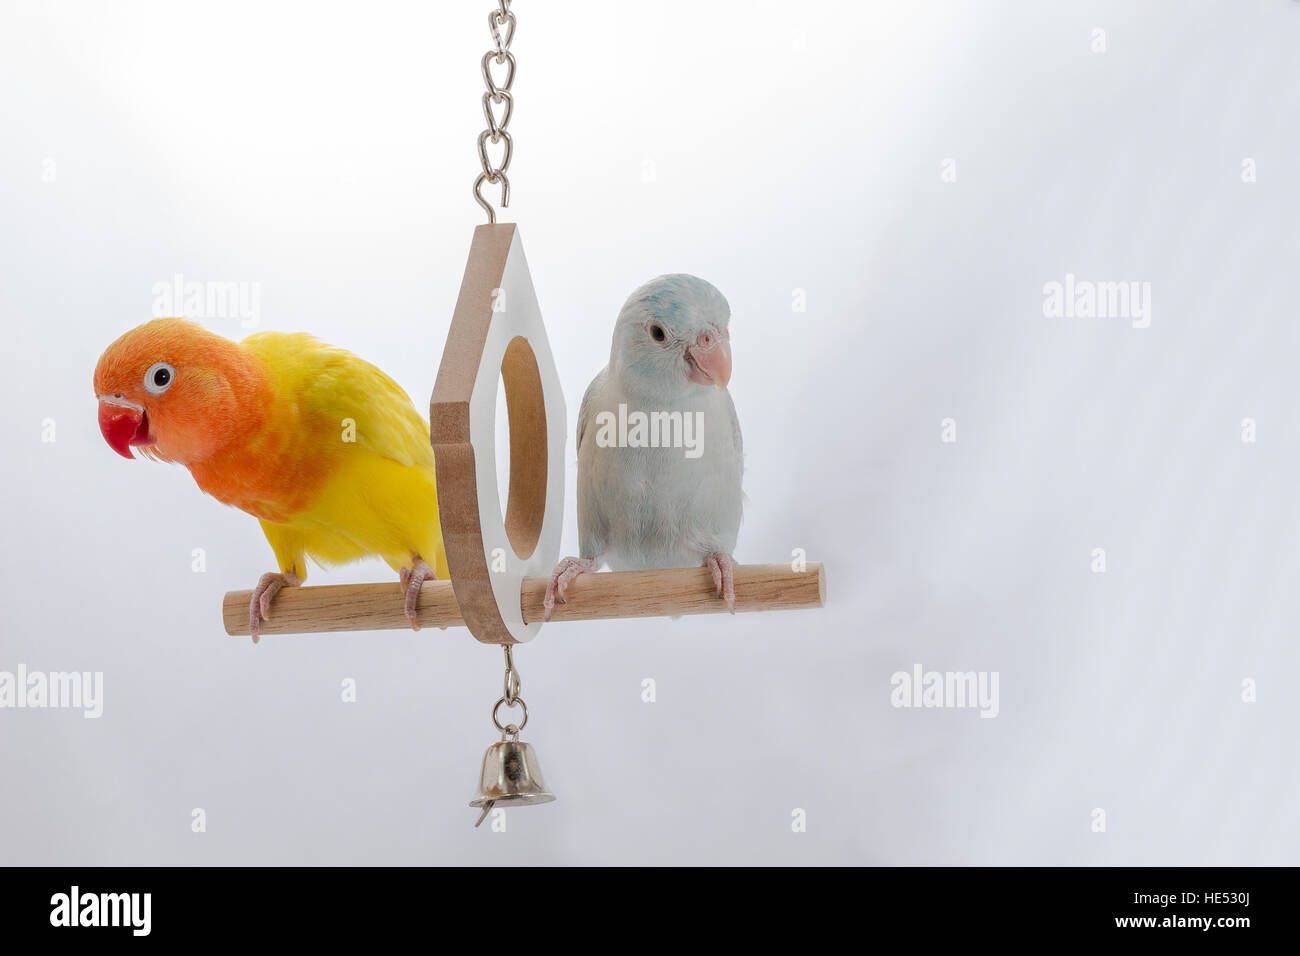 Lovebird and Forpus Playing together Stock Photo